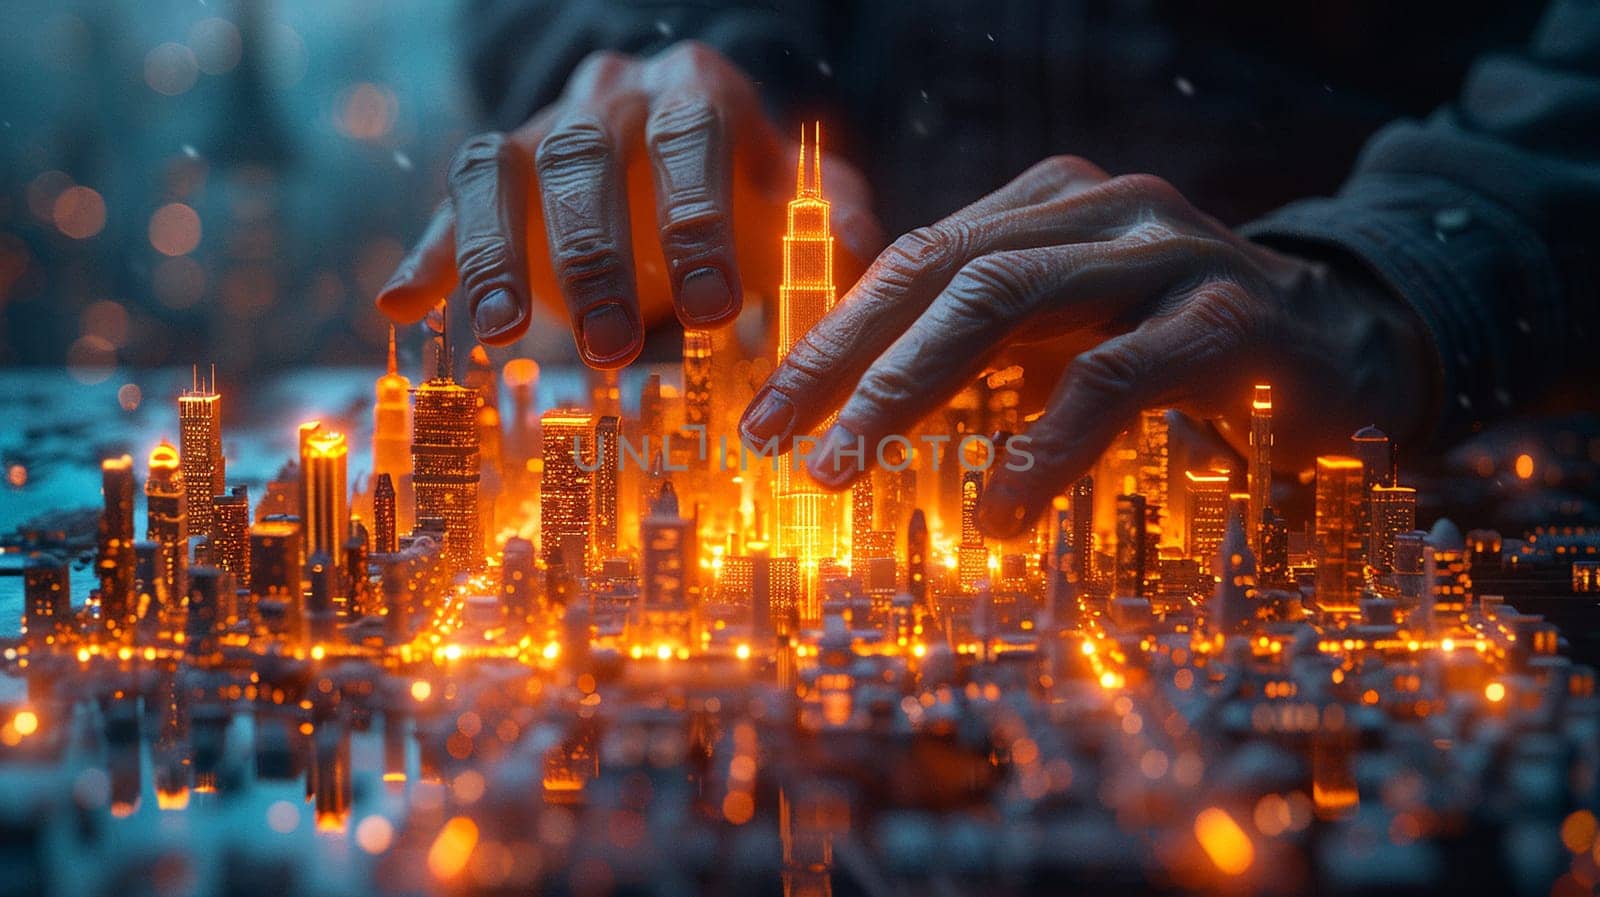 Architects hands over a holographic city model by Benzoix